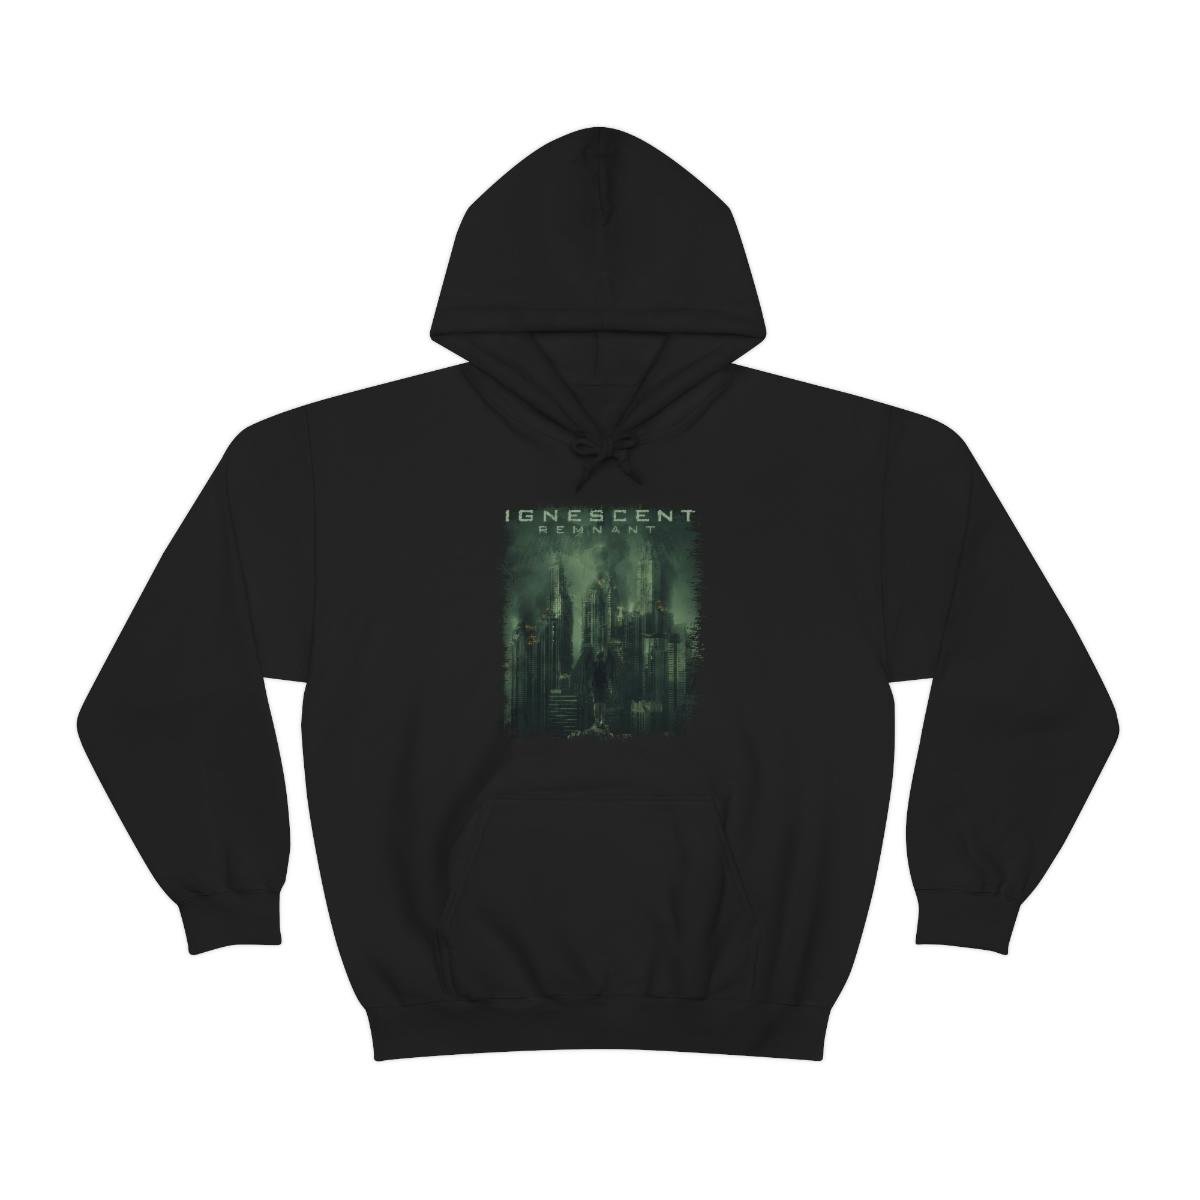 Ignescent – Remnant Pullover Hooded Sweatshirt (2 Sided)